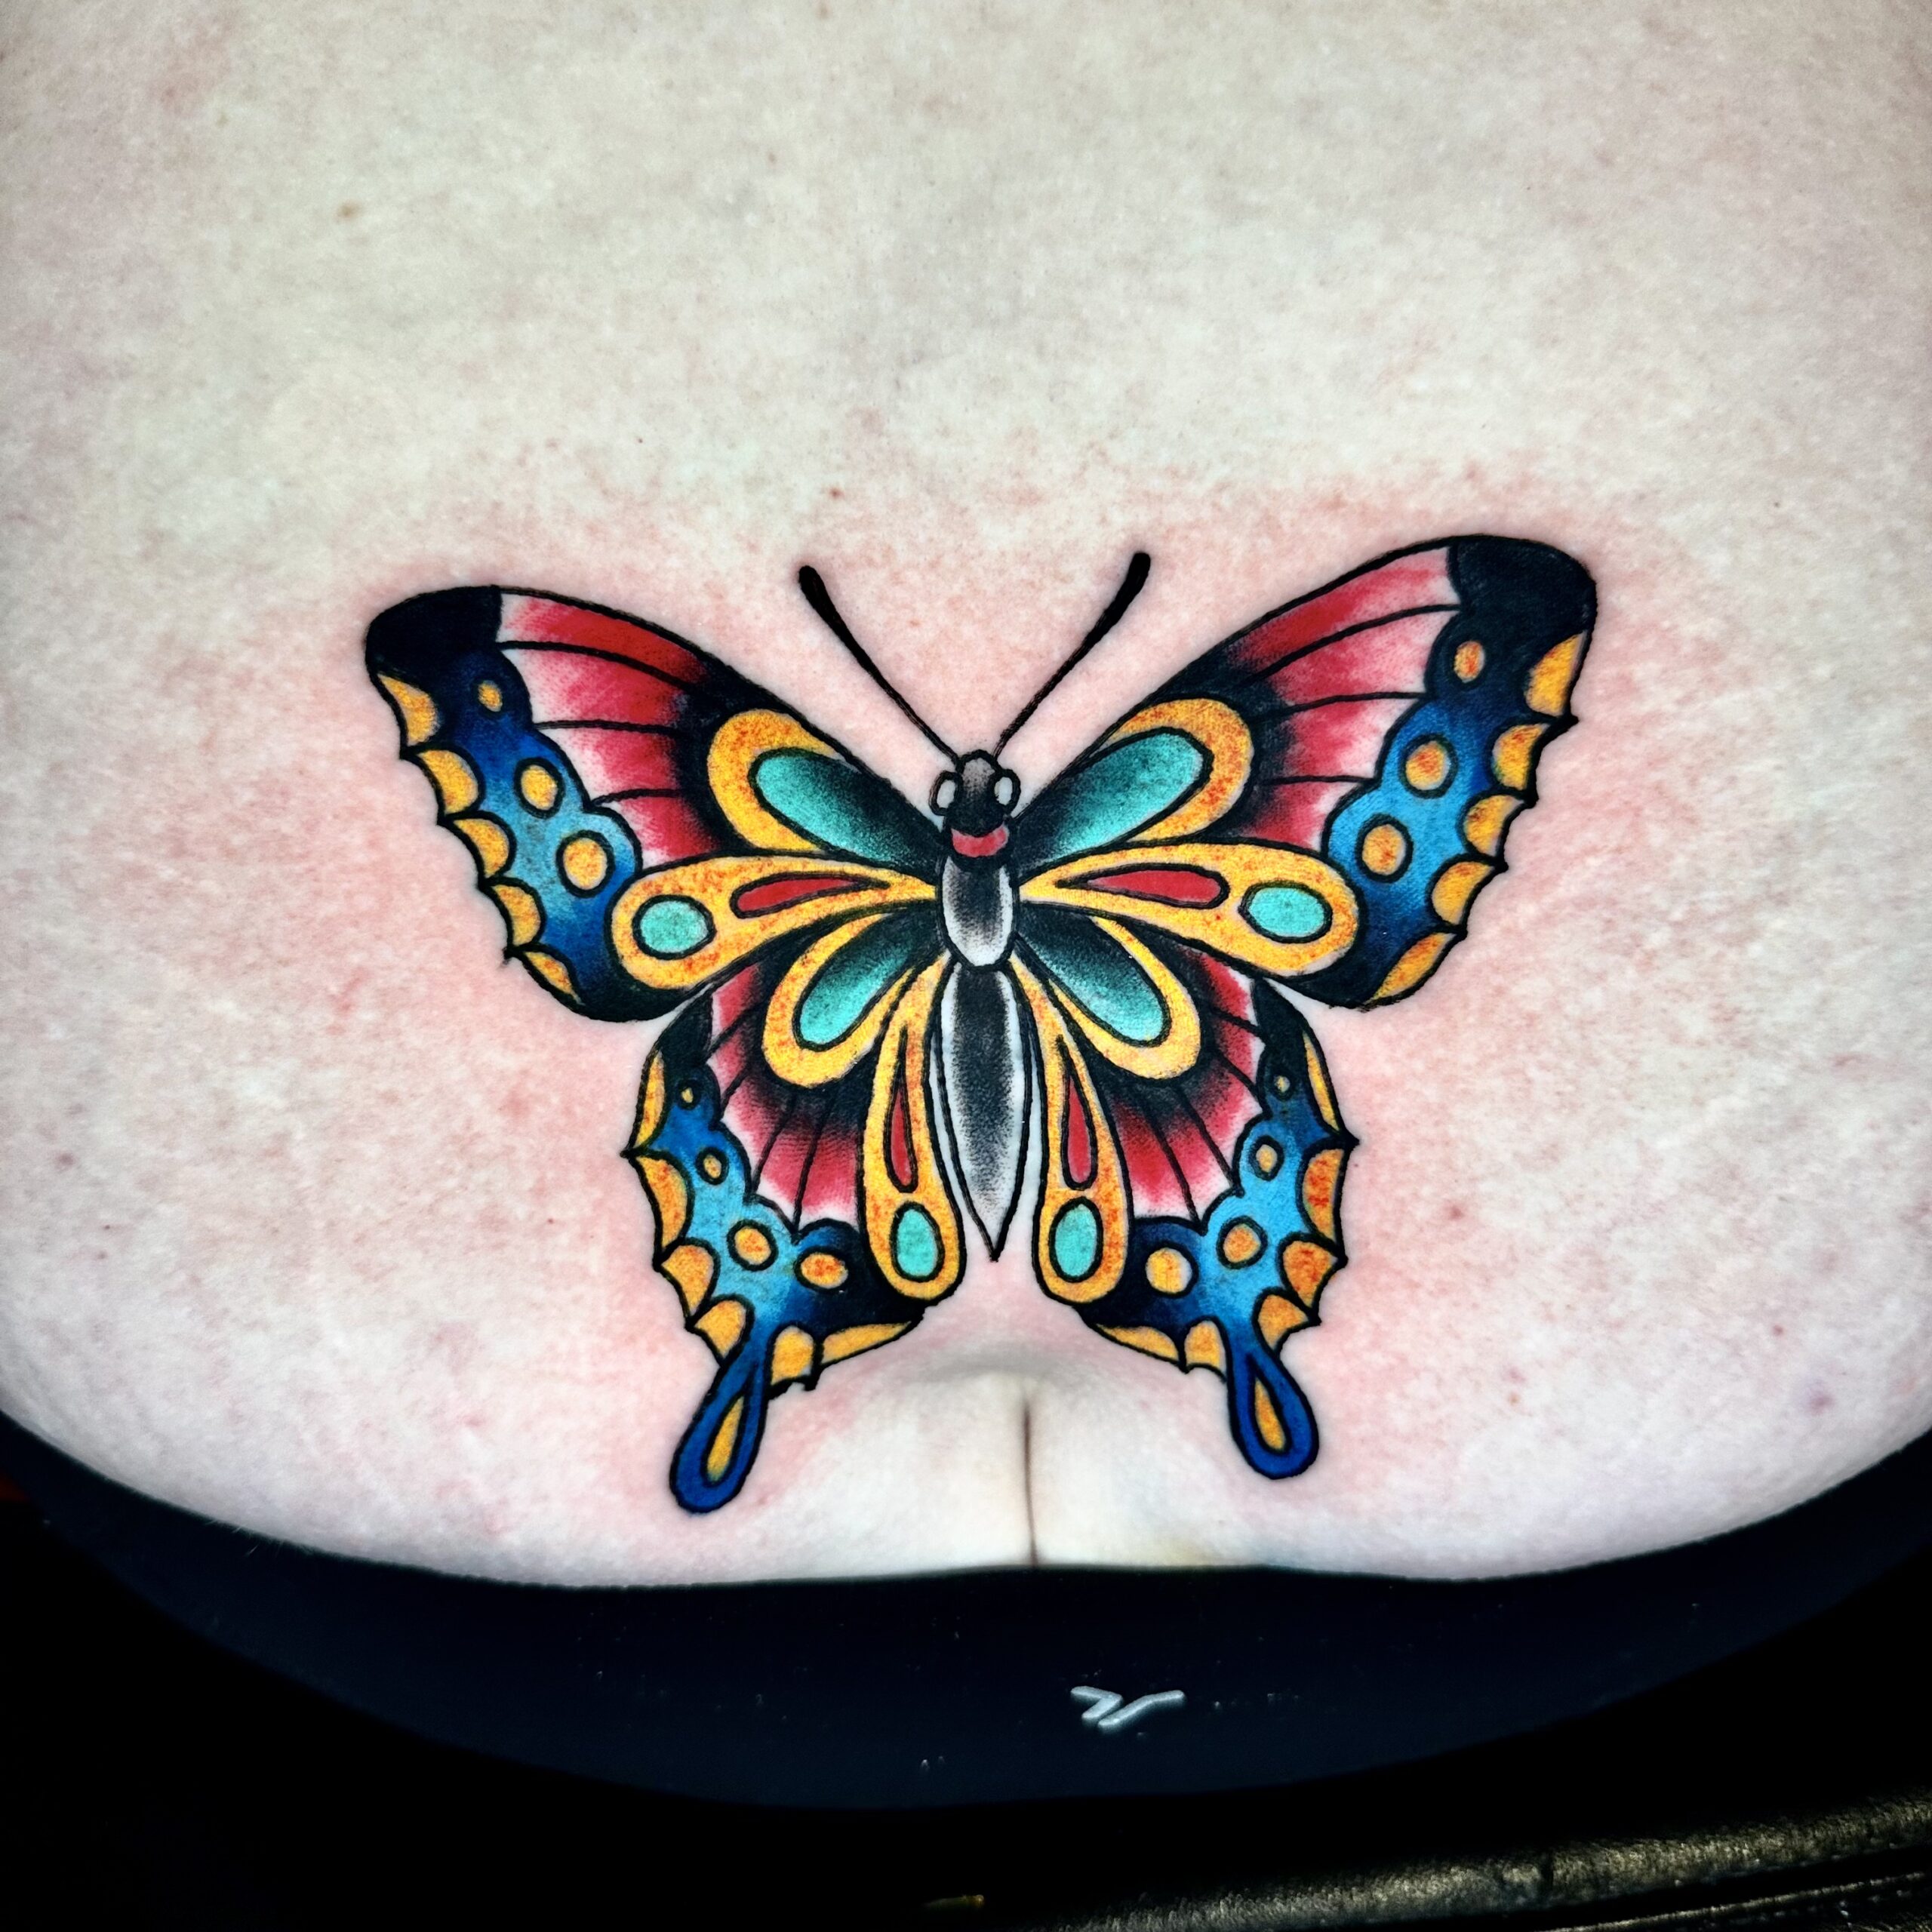 Tattoo of a colorful butterfly